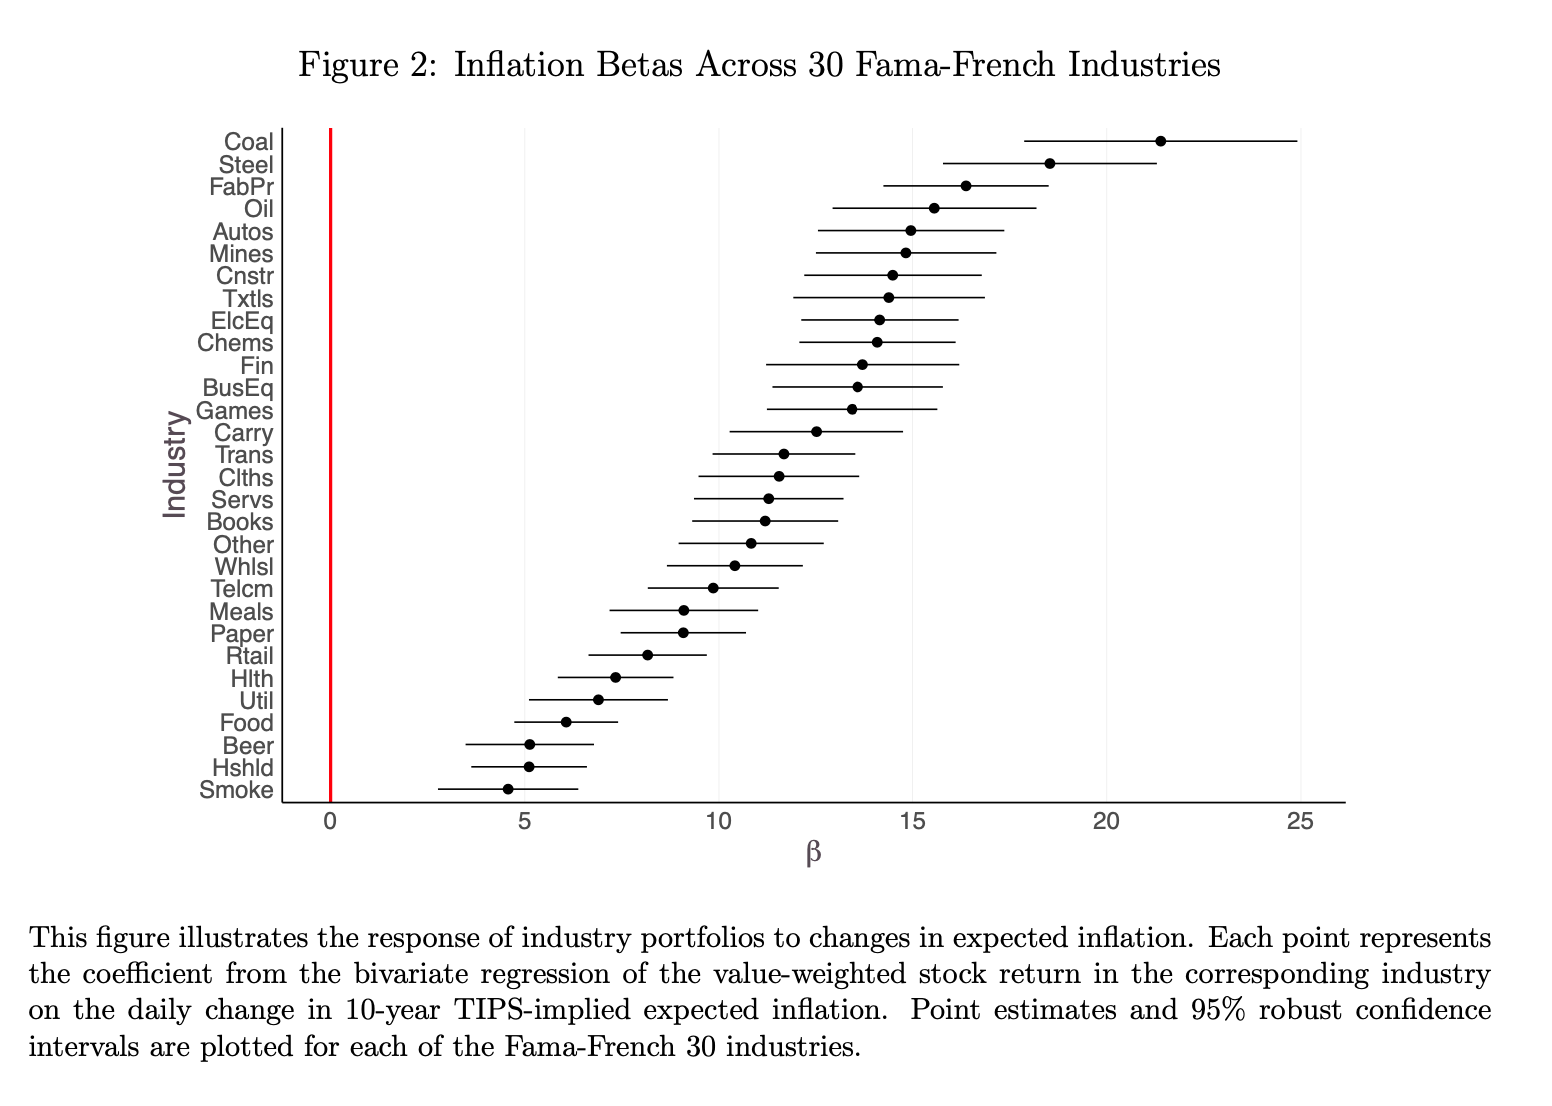 inflation betas across 30 fama-french industries